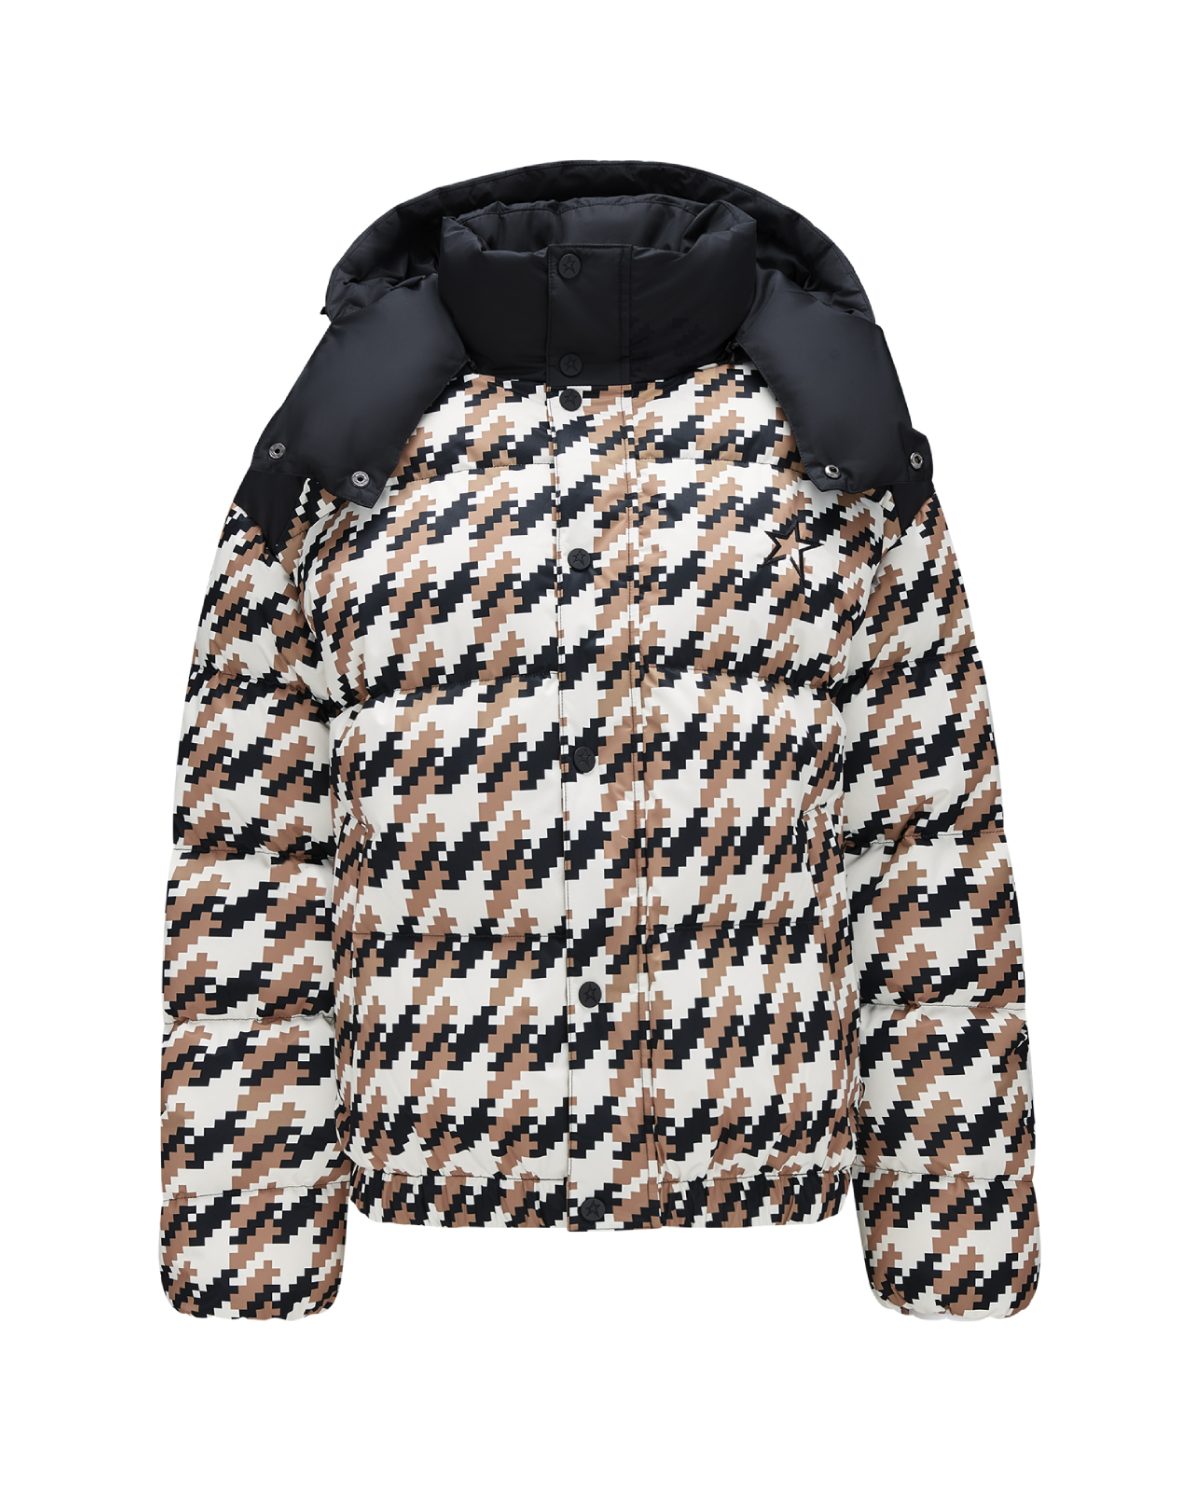 Perfect Moment Women's Houndstooth Moment Puffer - Camel, Black & White